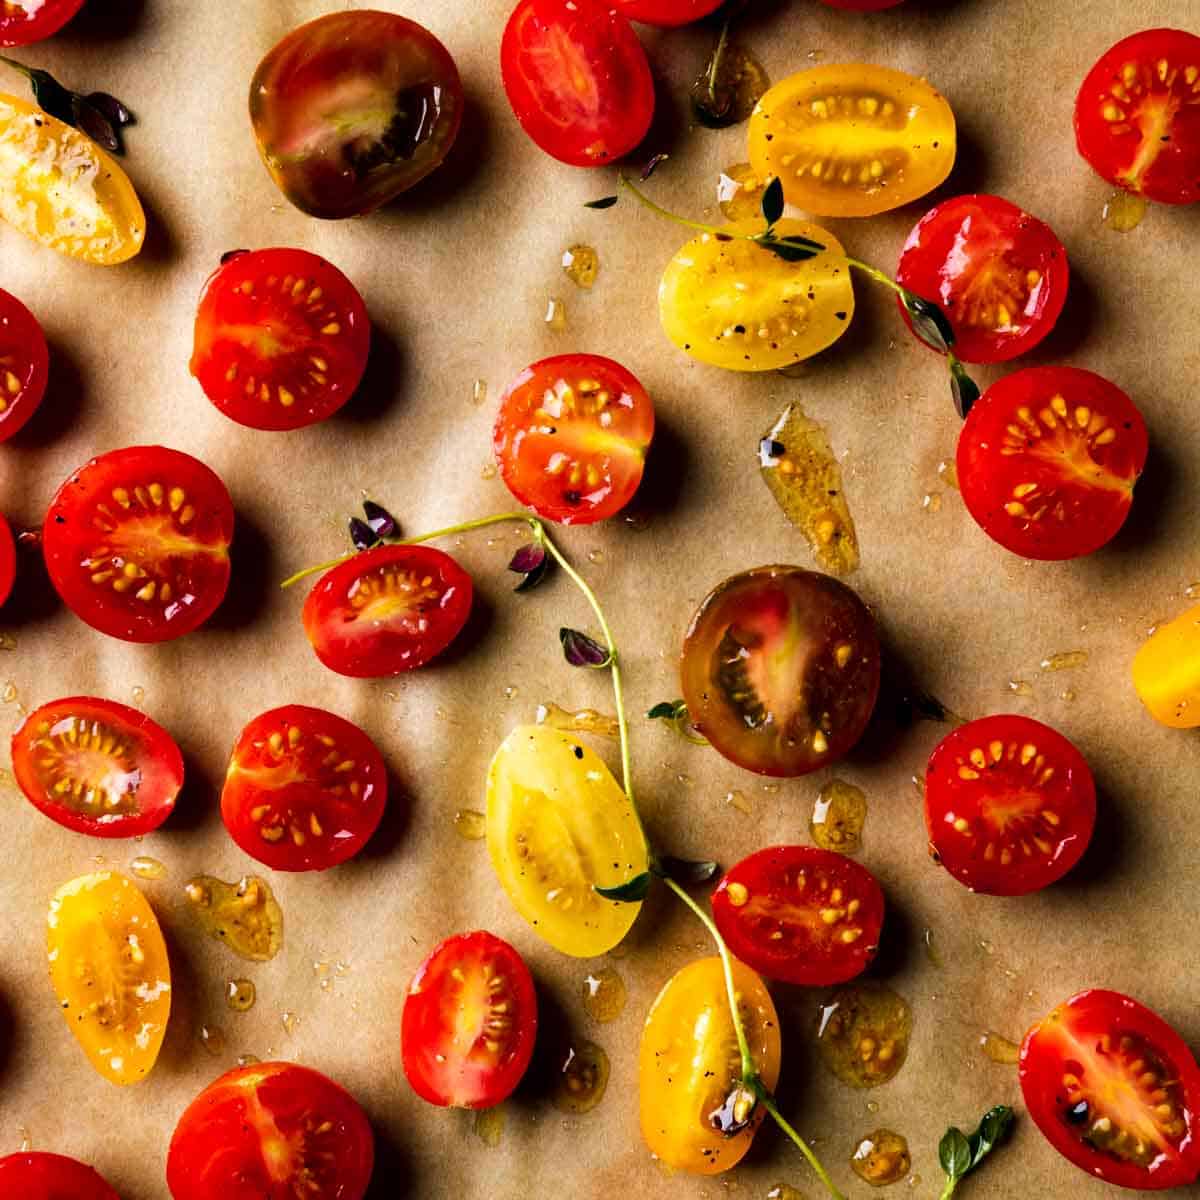 Halved red and yellow tomatoes on a parchment lined baking sheet with a sprig of thyme